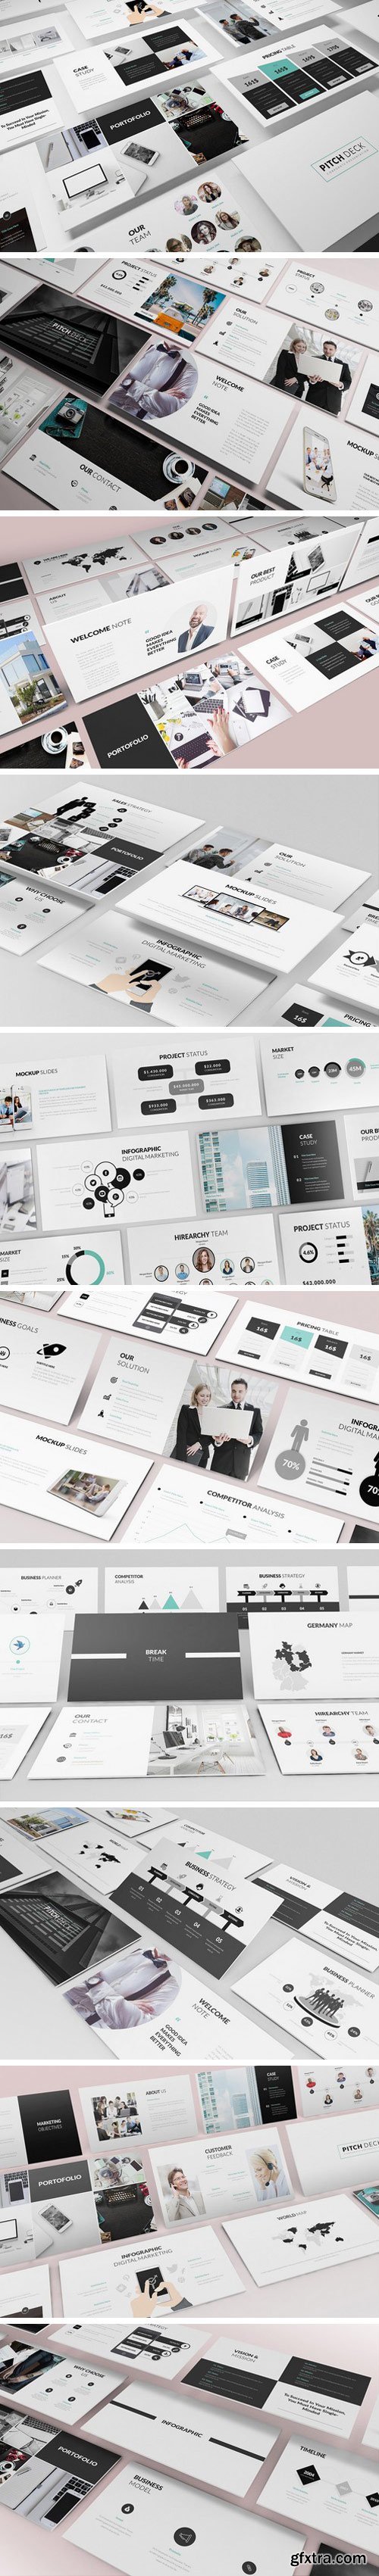 CM - Pitch Deck Powerpoint Template 2299174